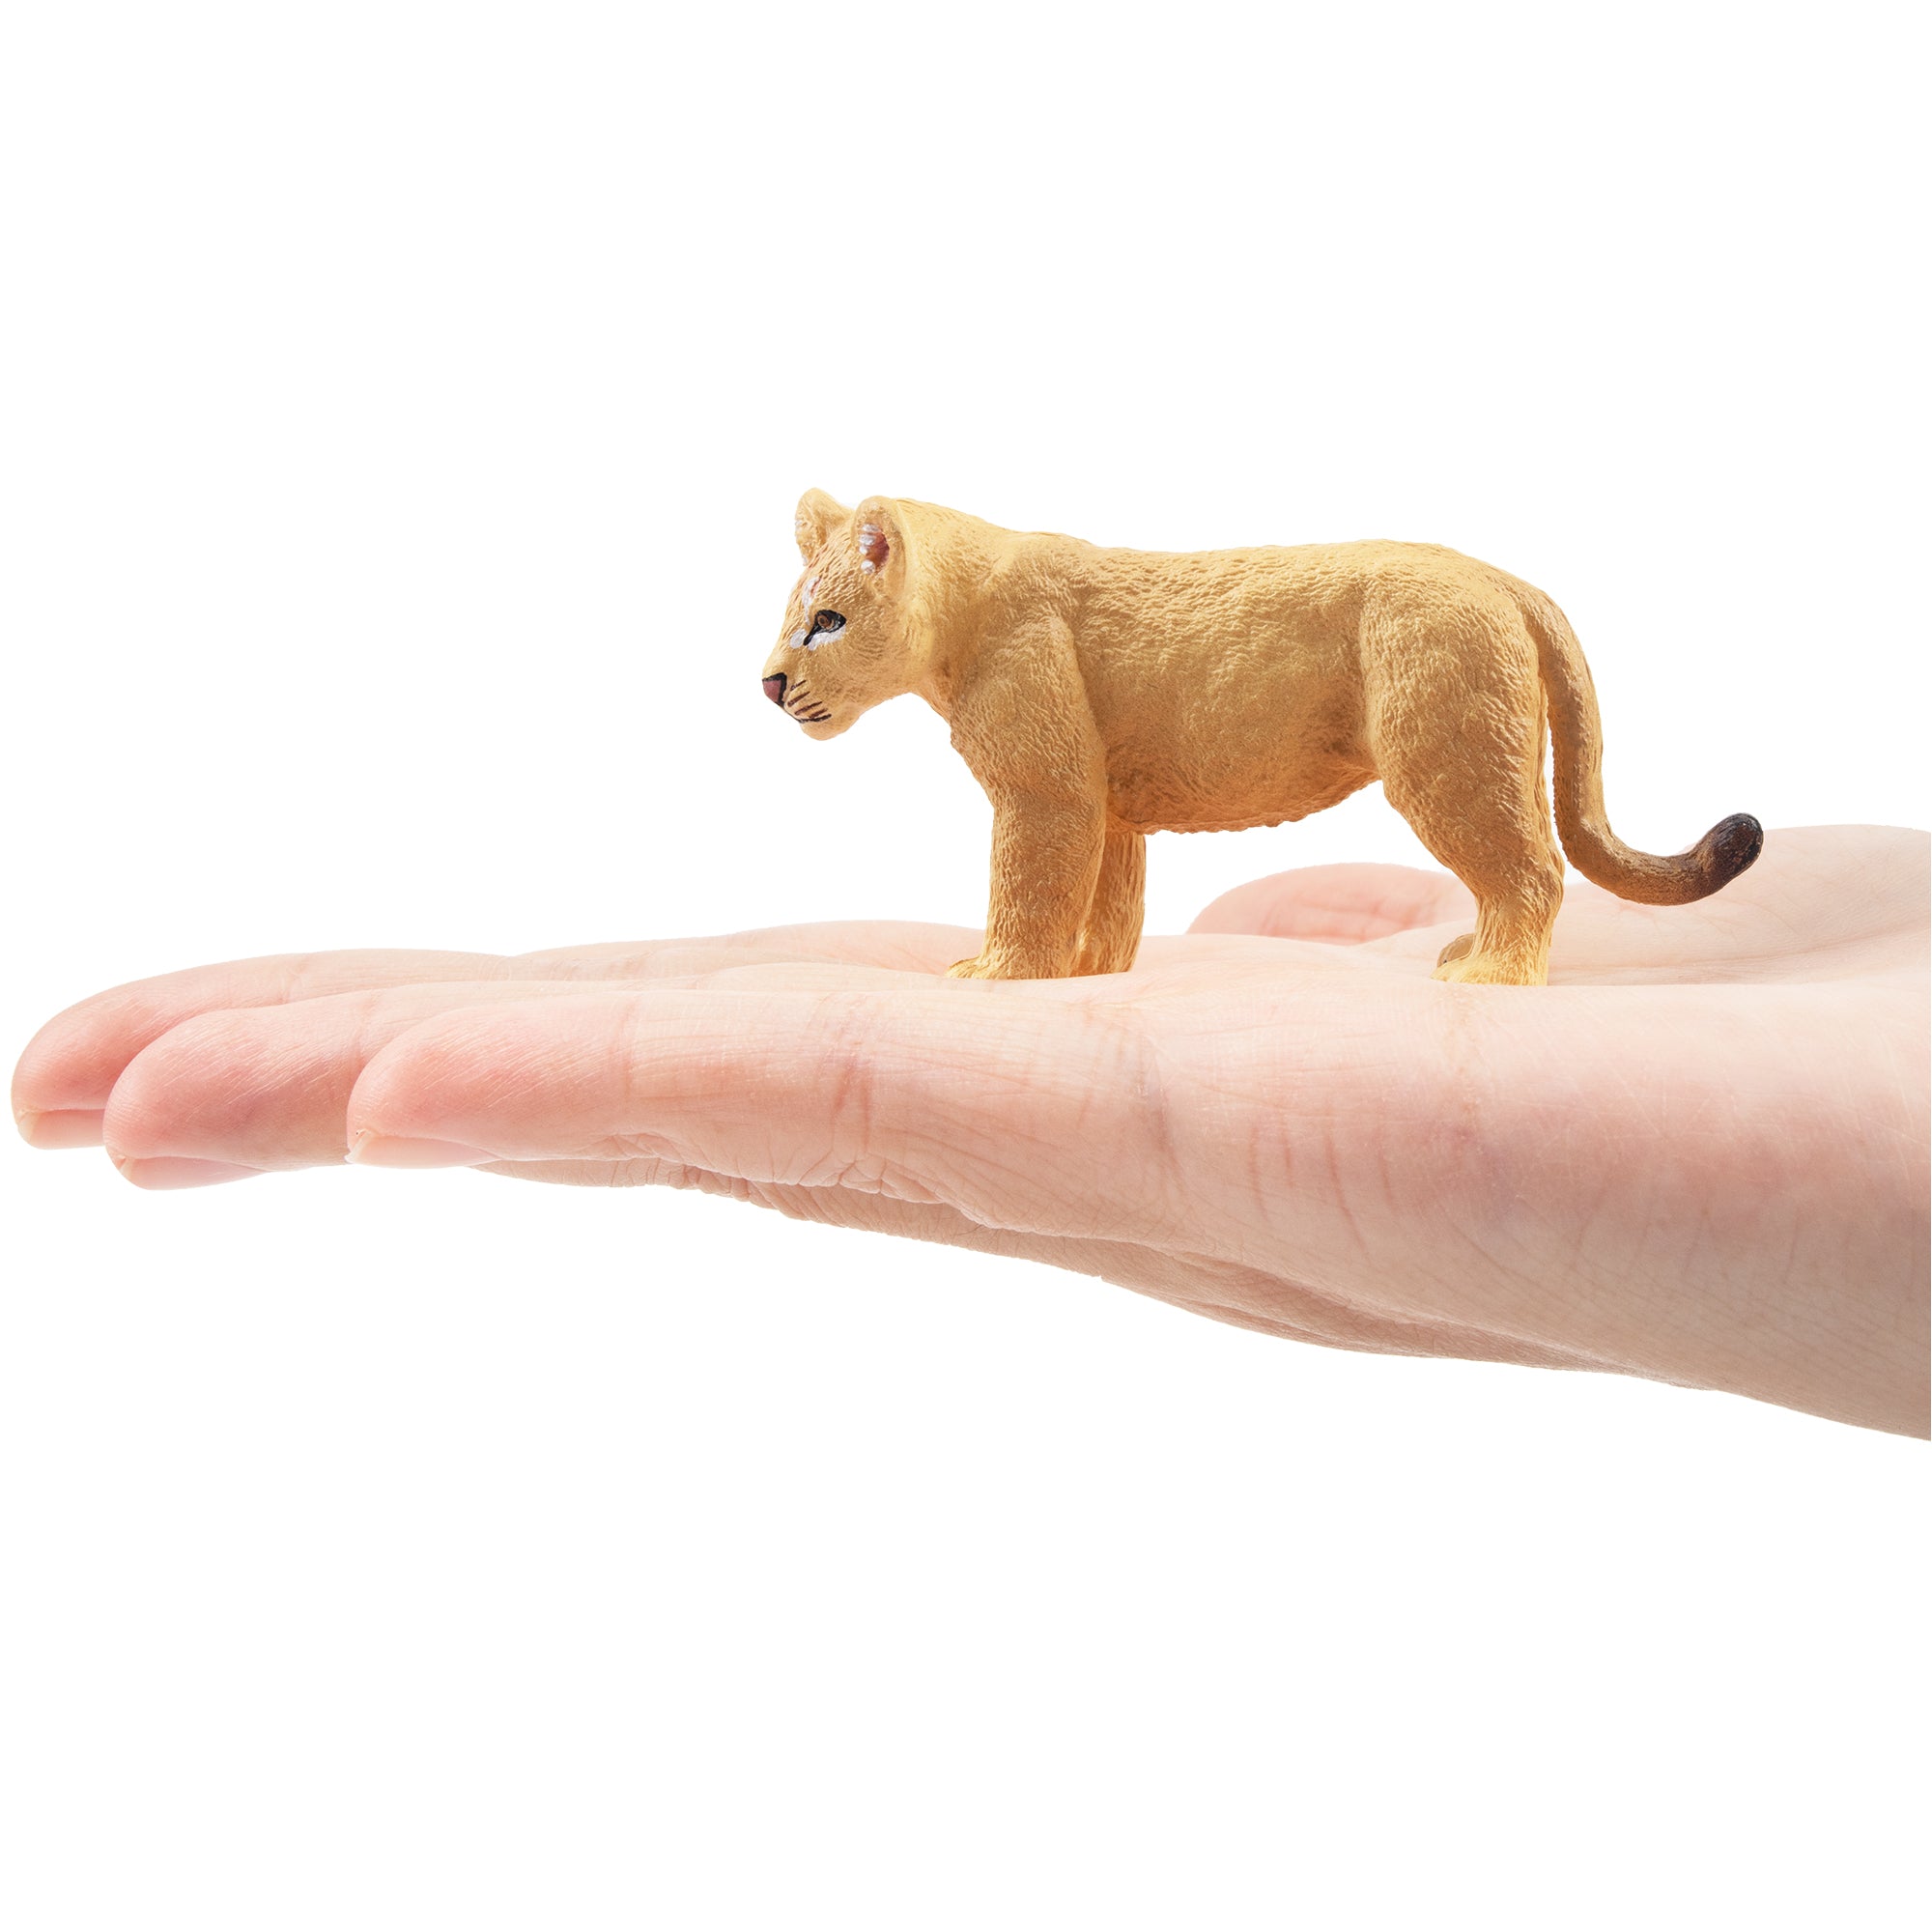 Toymany Standing Lion Cub Figurine Toy - 1-on hand